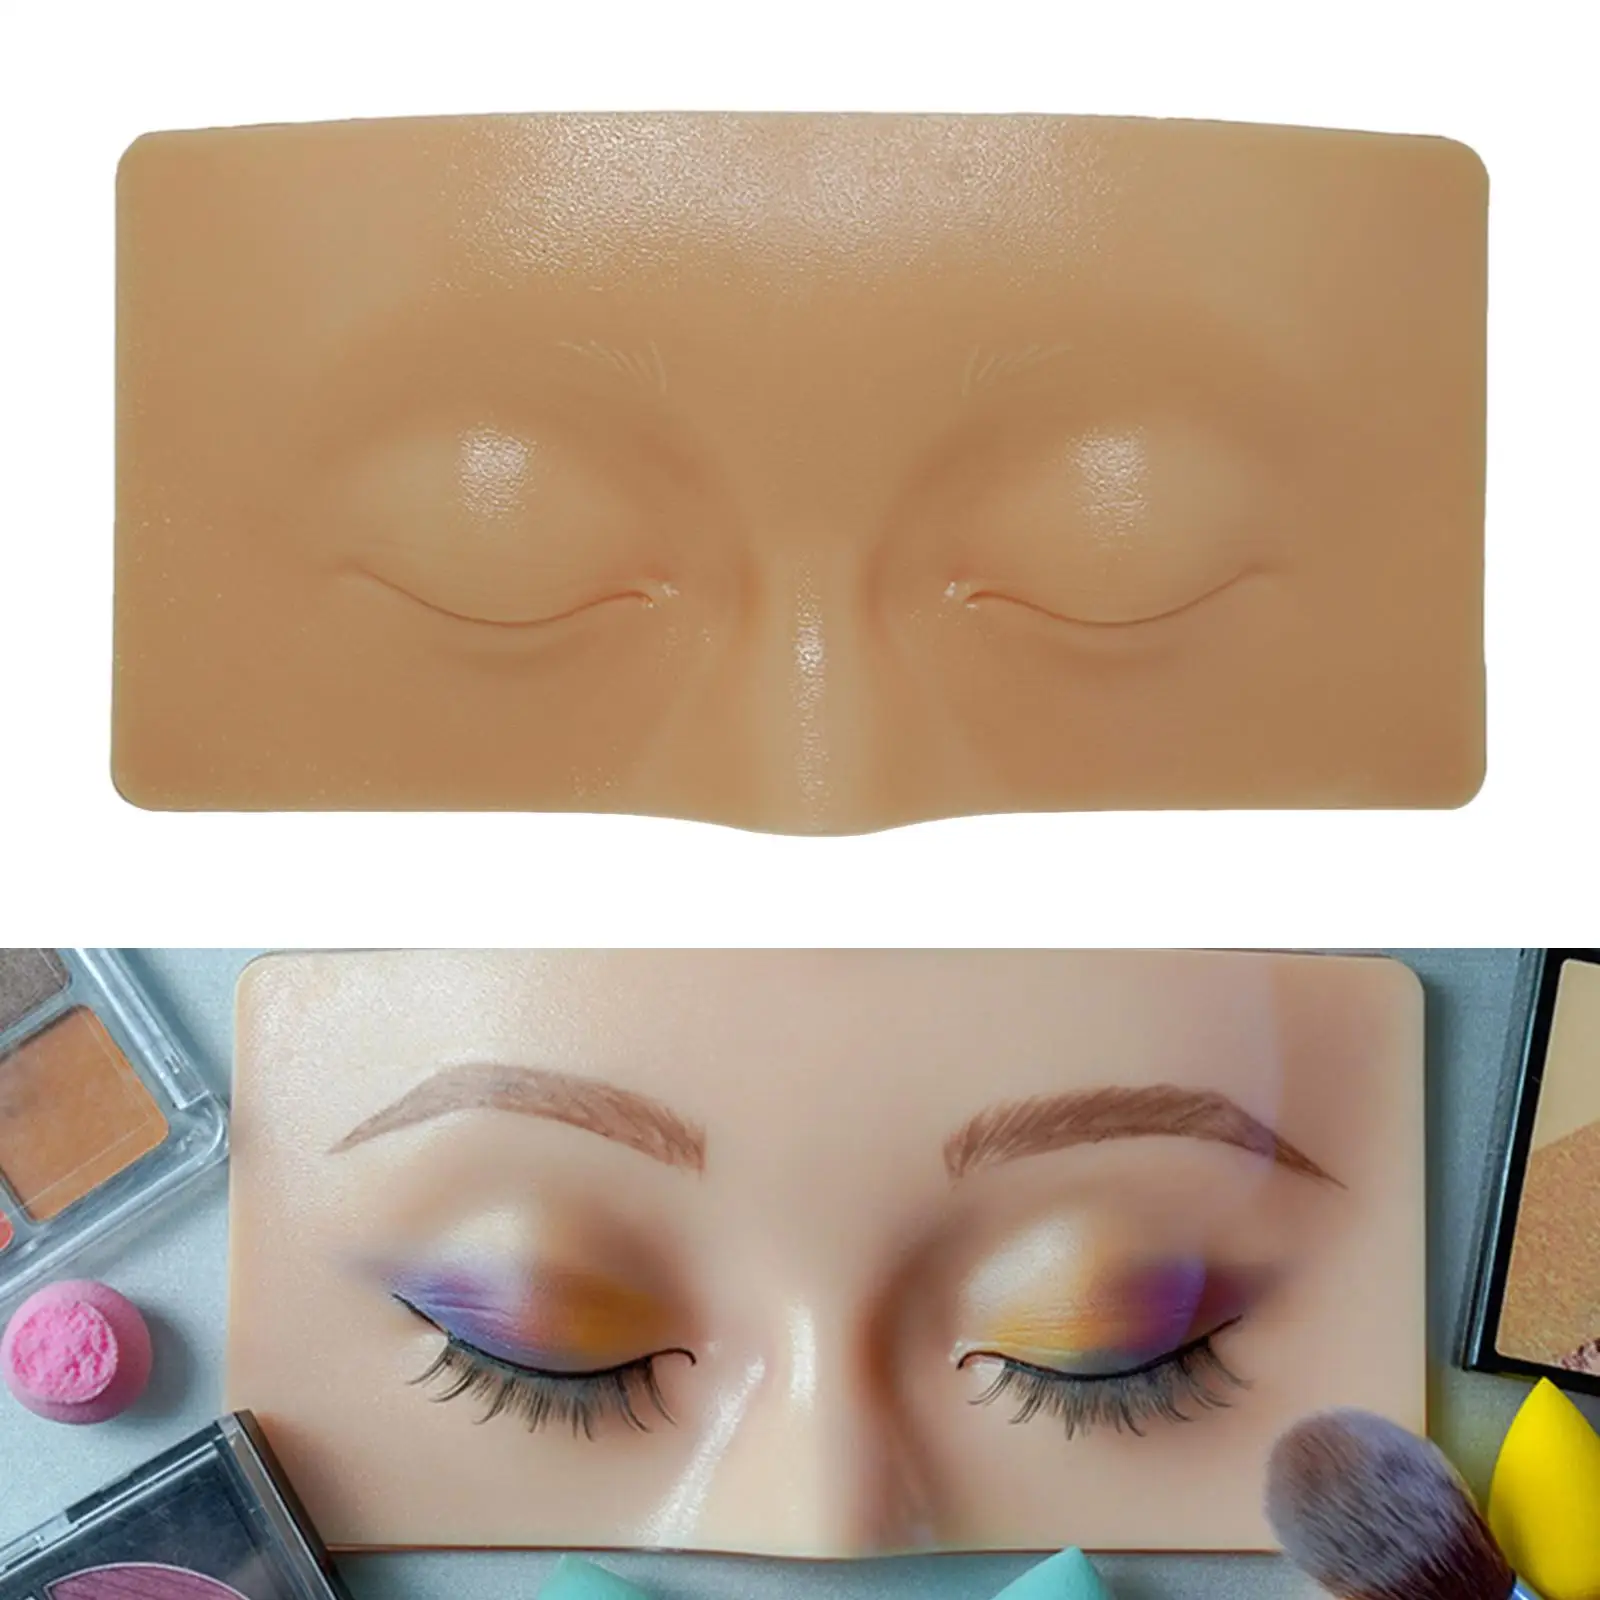 Makeup Practice board, Training make up Practice Board for Professional Enthusiasts Beginners Training